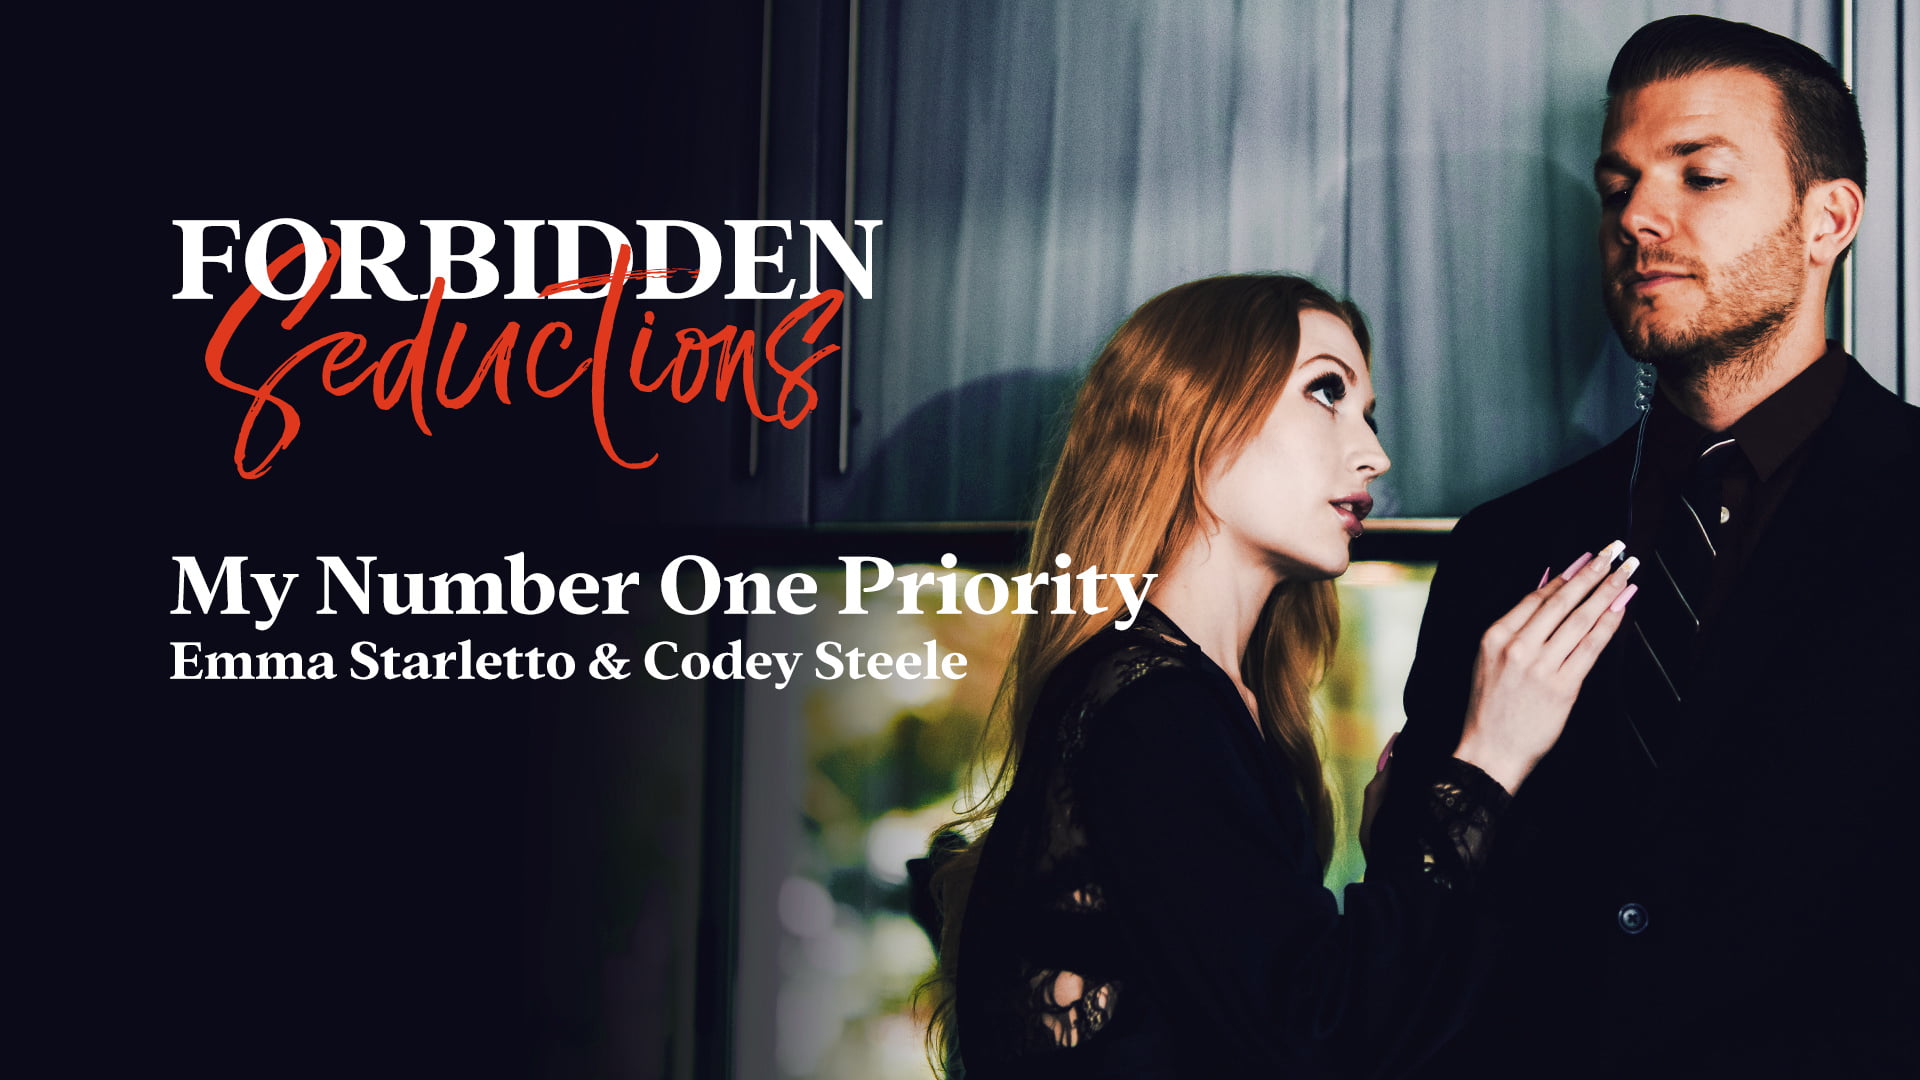 ForbiddenSeductions &#8211; Emma Starletto &#8211; My Number One Priority, PervTube.net